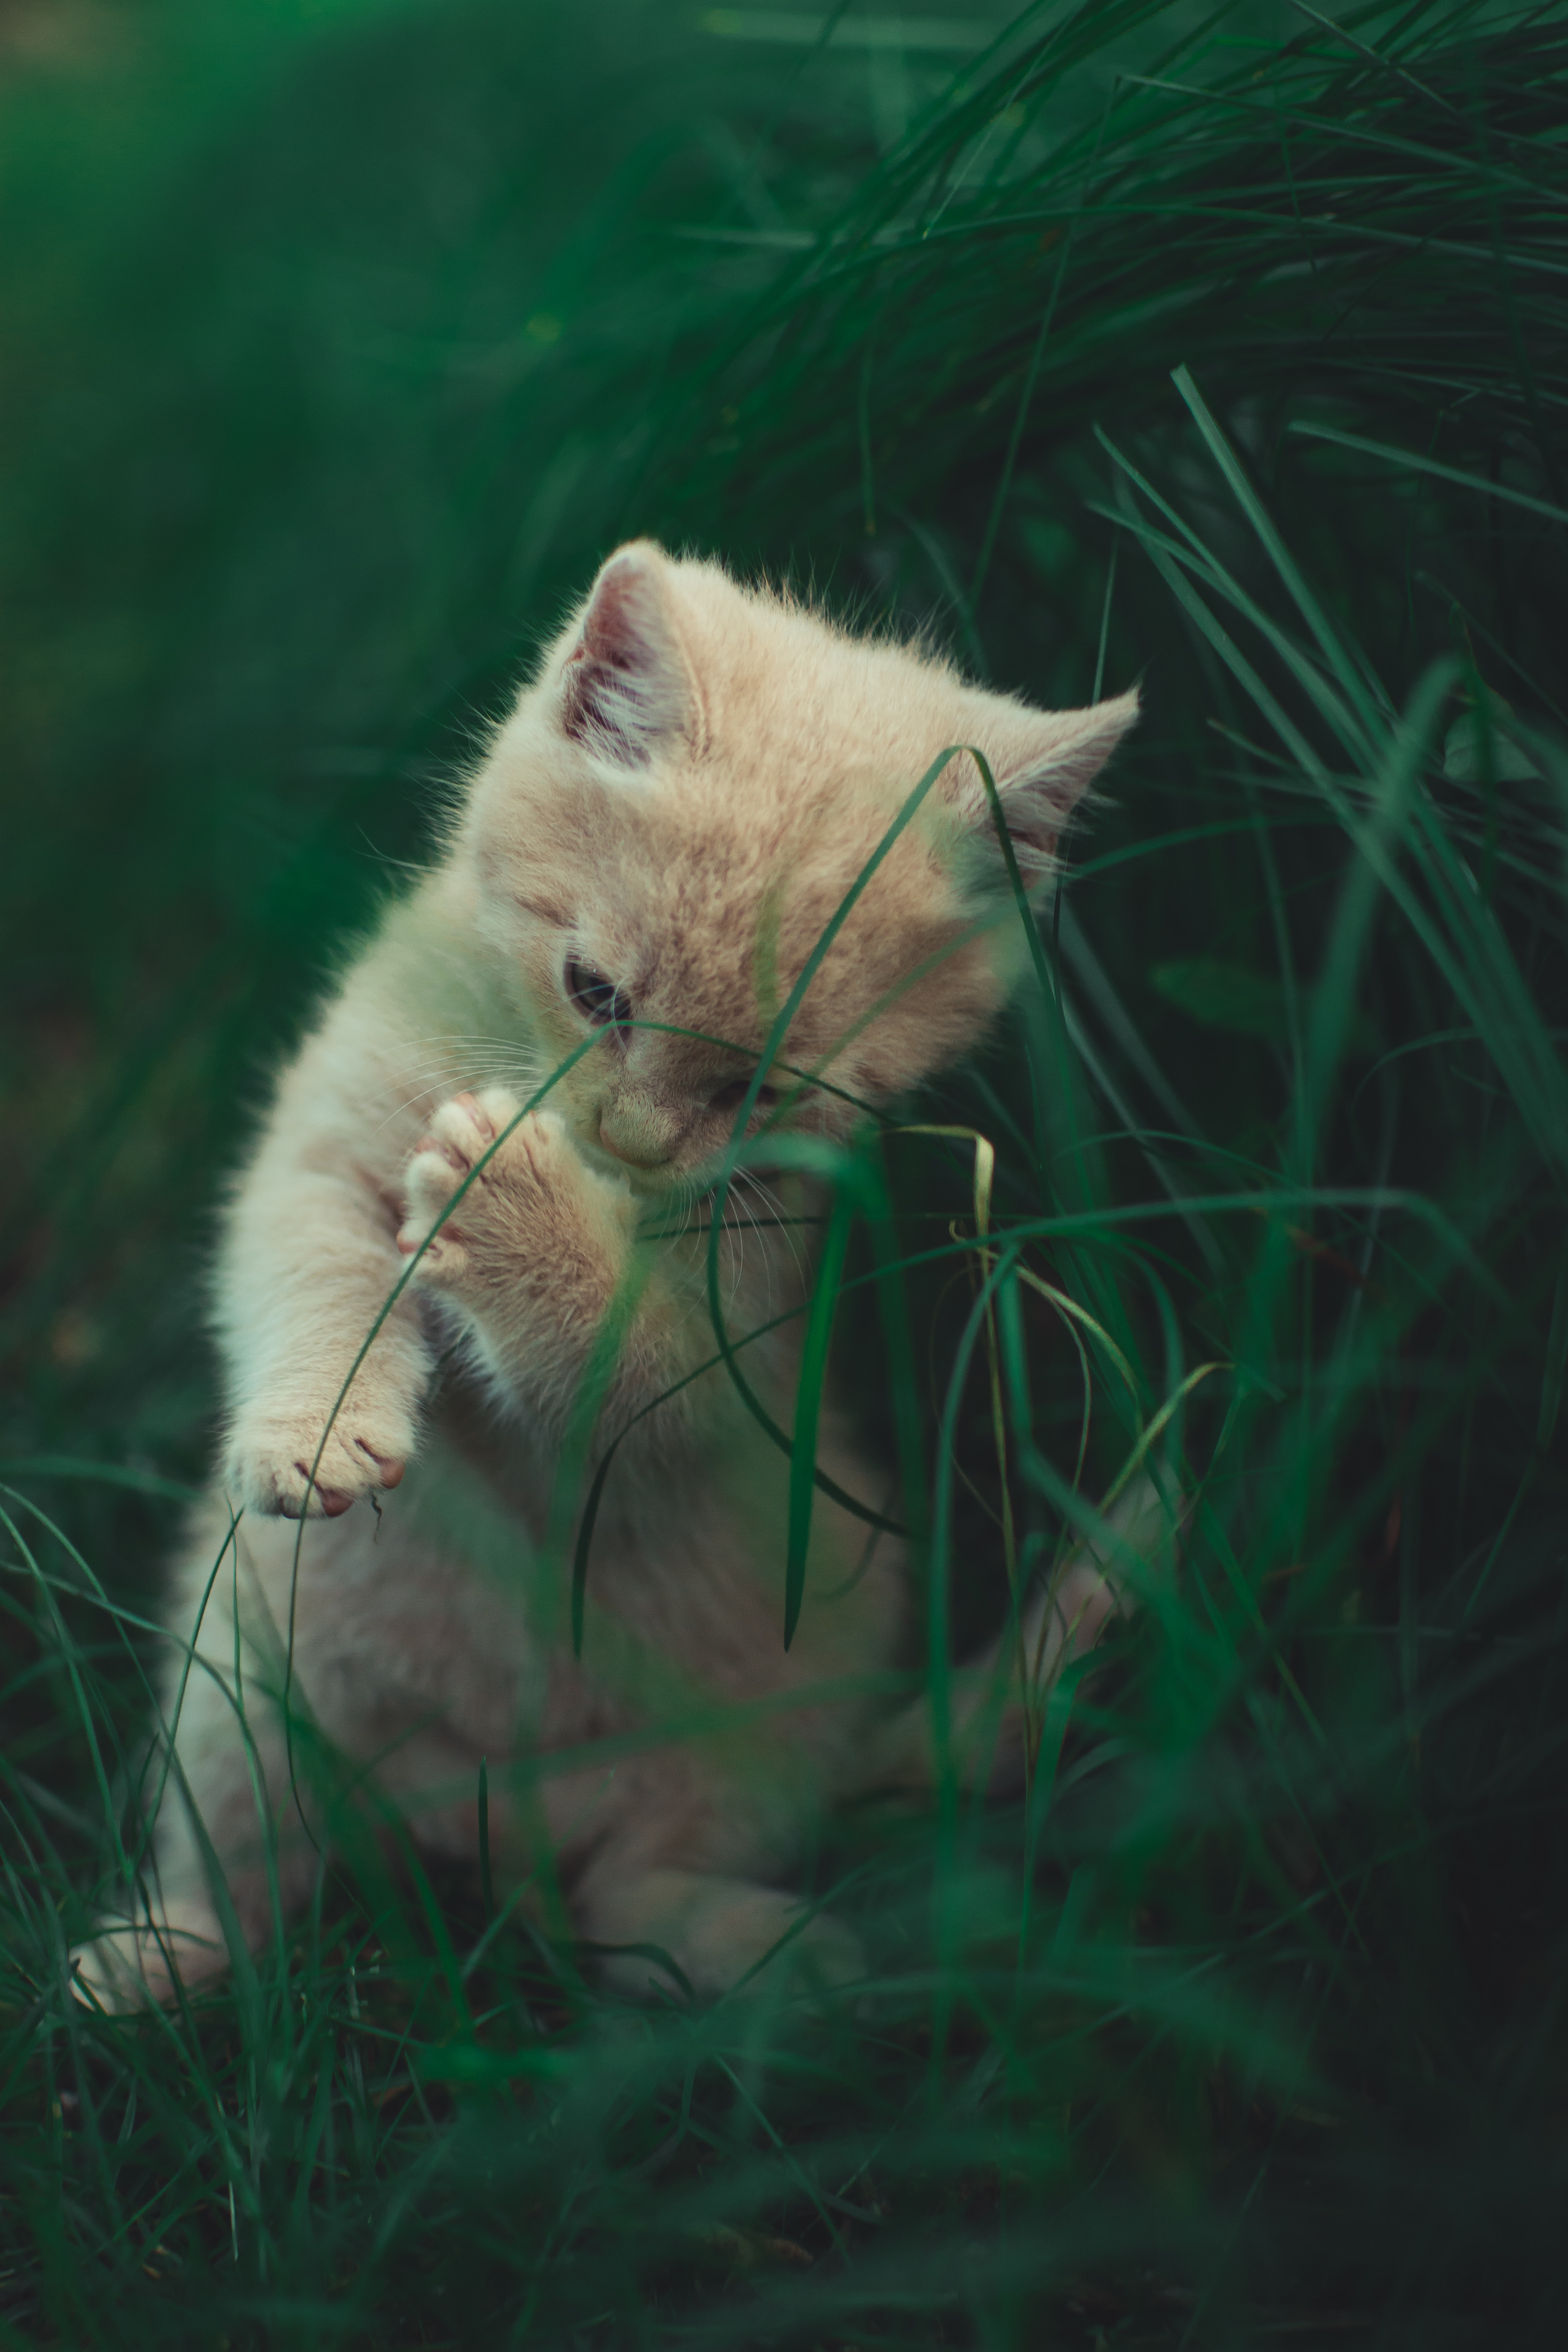 grass, cat, kitty, animals, sweetheart, playful, kitten, nice for android